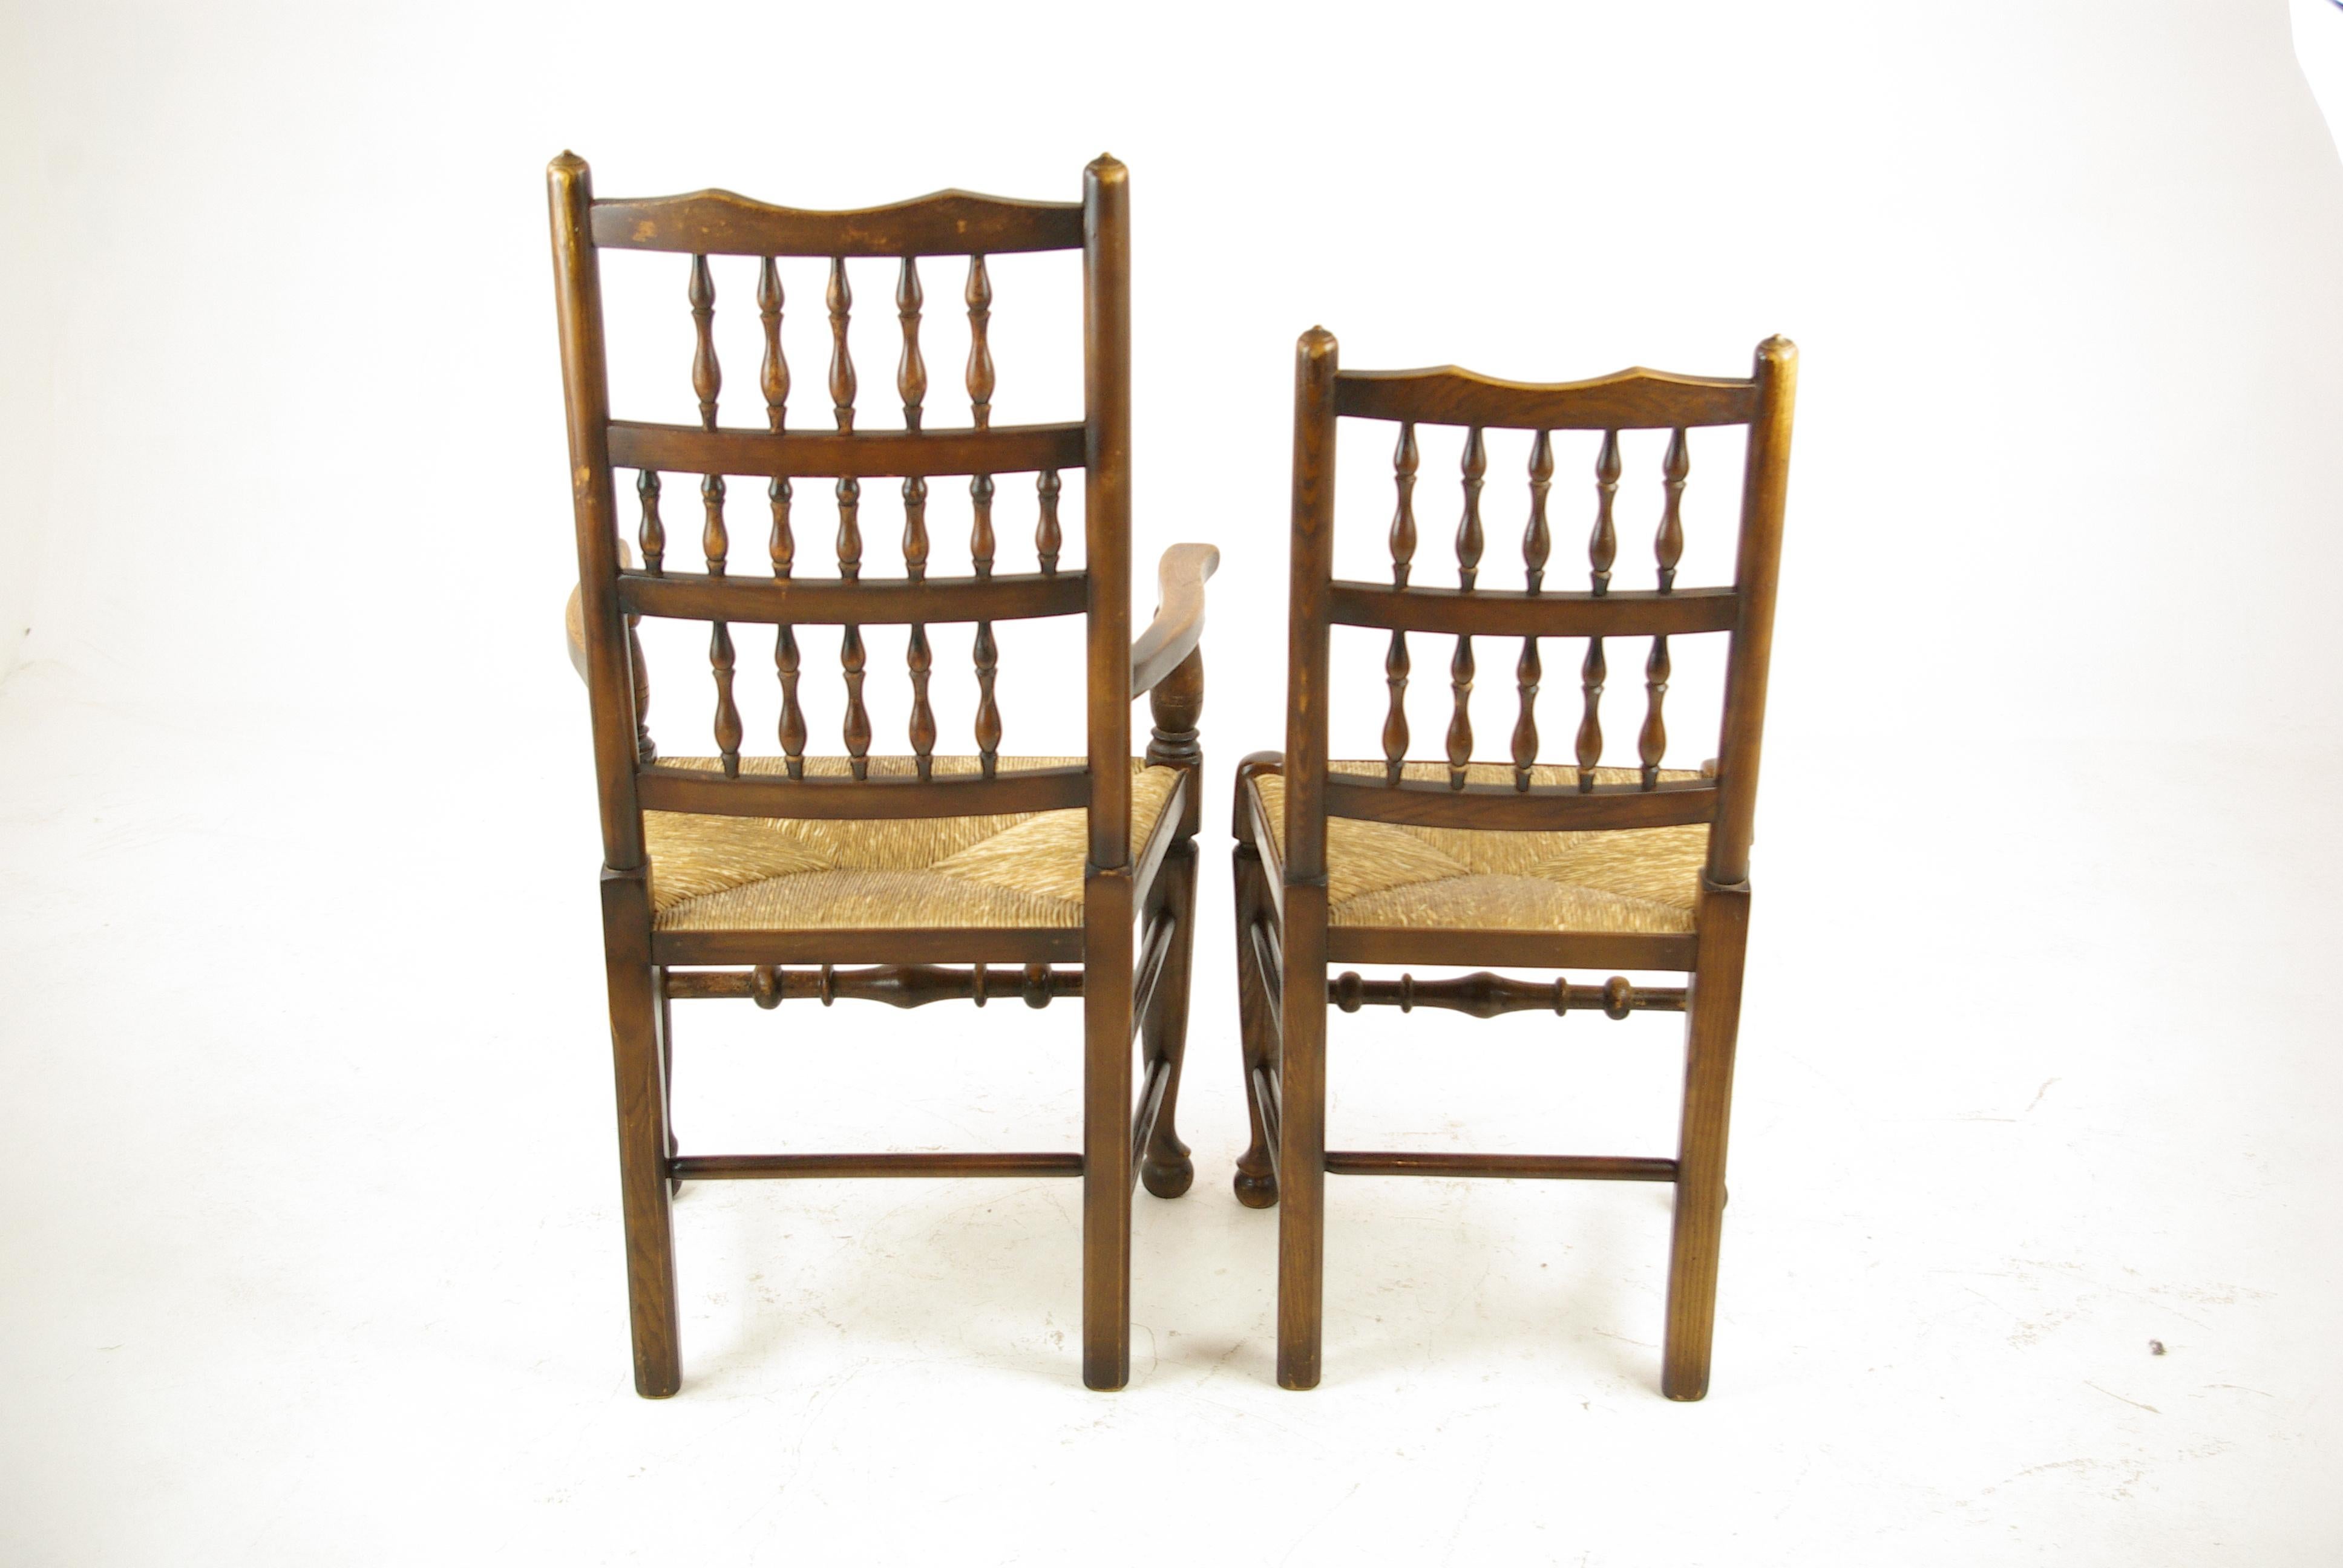 Antique Dining Chairs, Country Rush Chairs, 6+2 Chairs, Scotland 1900, B1252 (Schottisch)